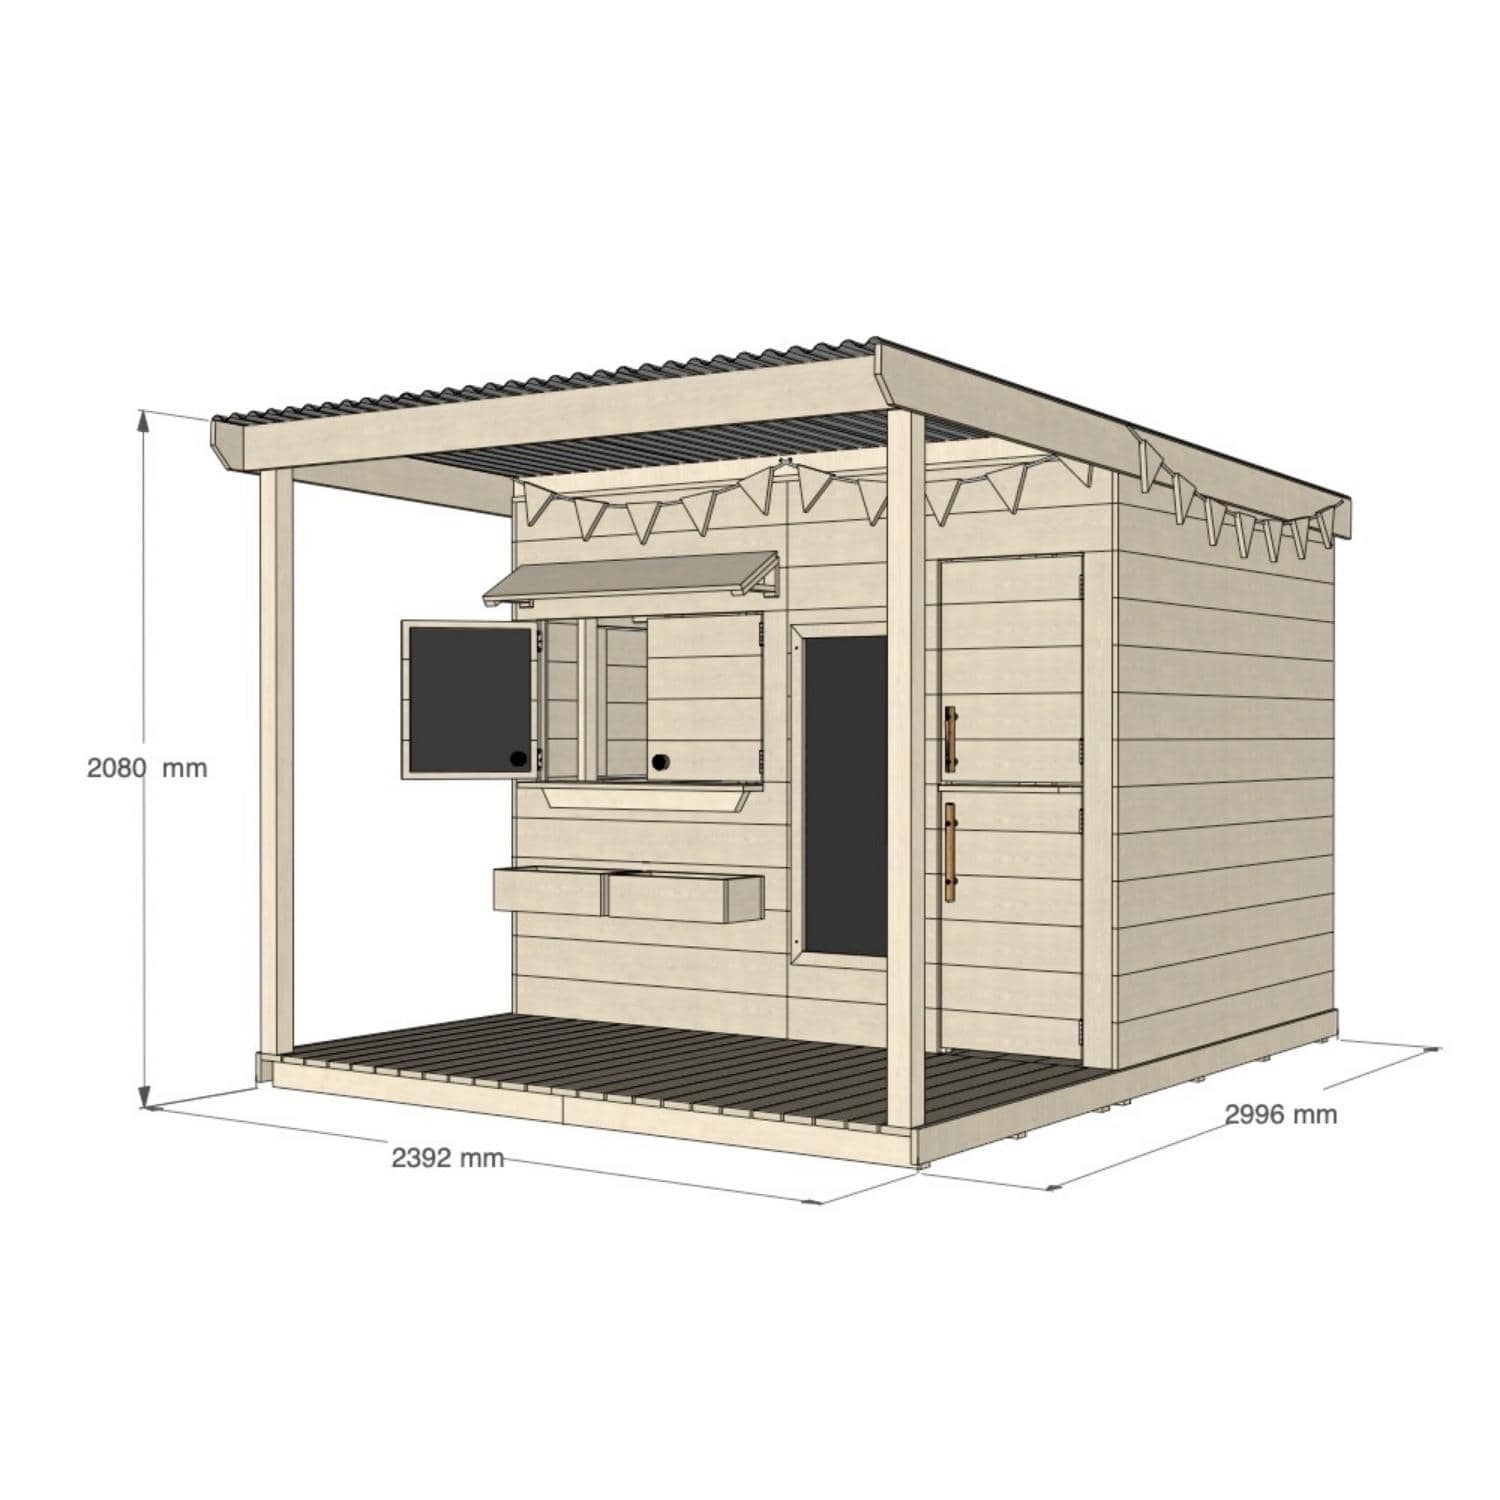 Raw pine extended height cubby house with front verandah for residential backyards large rectangle size with dimensions